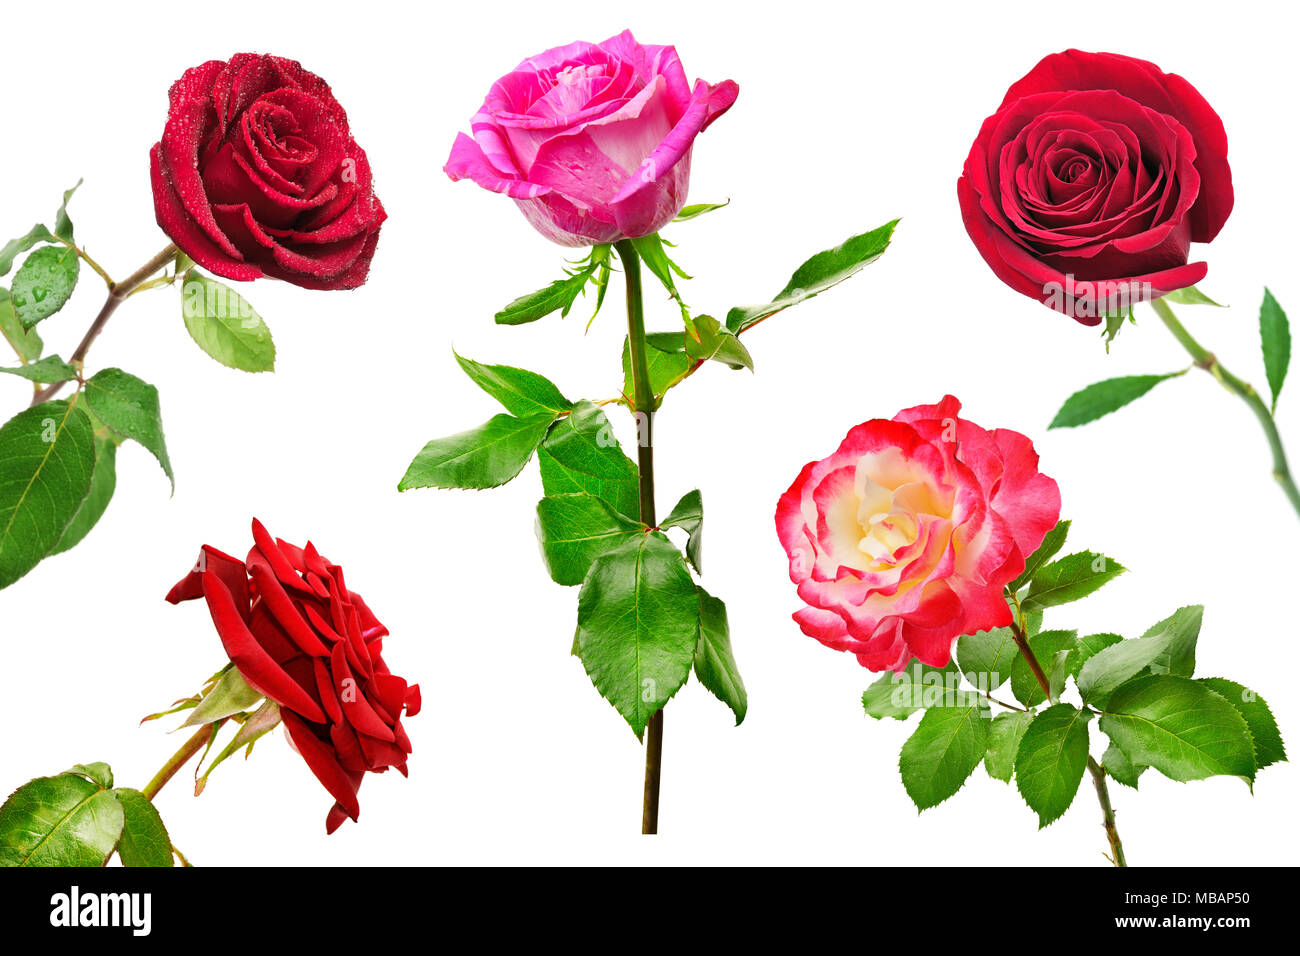 Set of beautiful red roses isolated on white background. Beauty in nature from different angles. Stock Photo